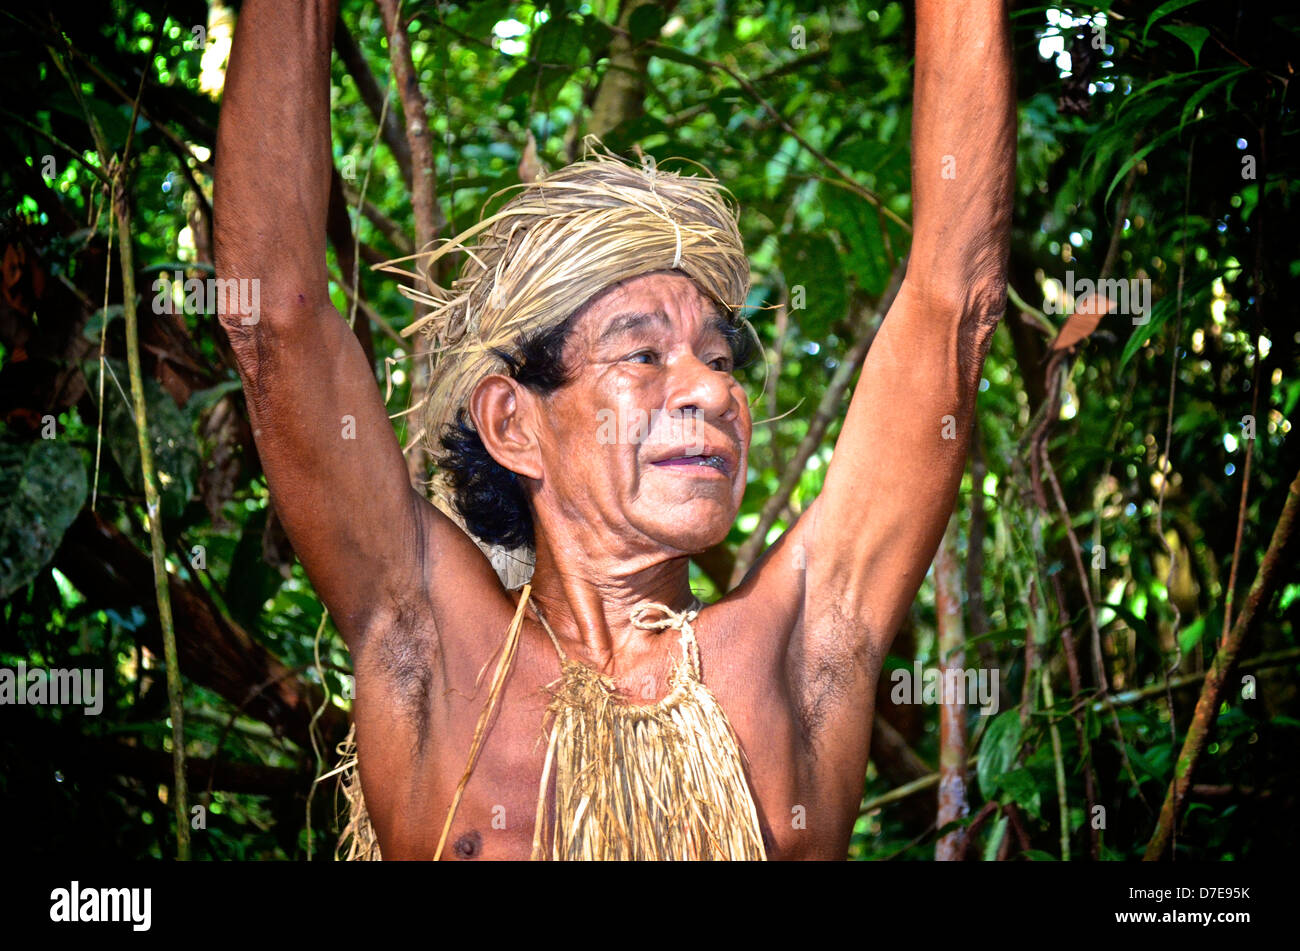 A member of the Yagua tribe in the Amazon rain forest near Iquitos, Peru Stock Photo